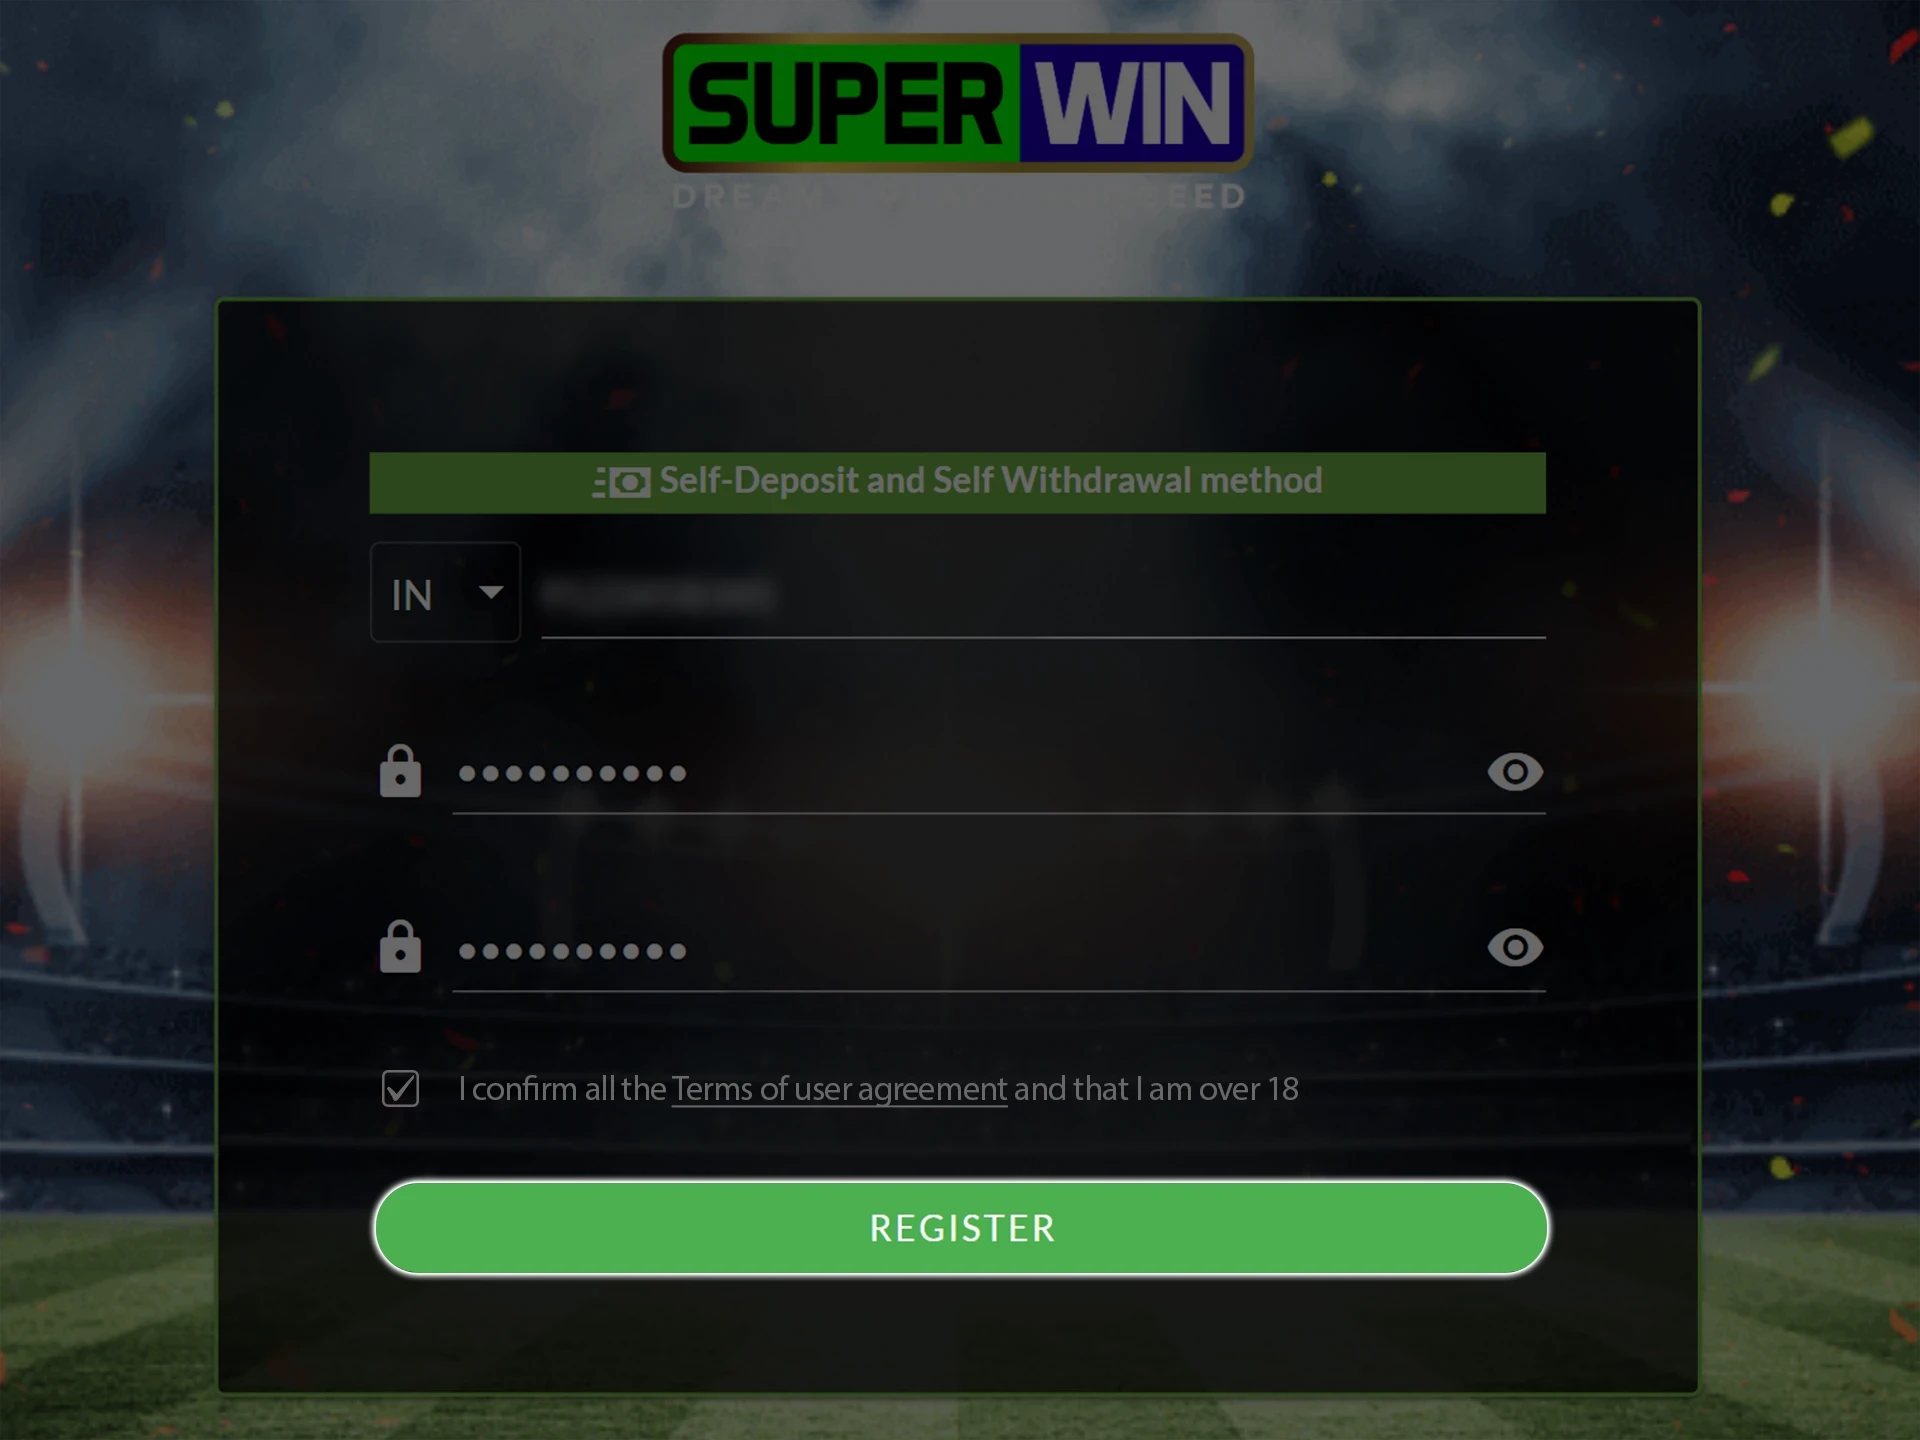 Complete the registration process at SuperWin.